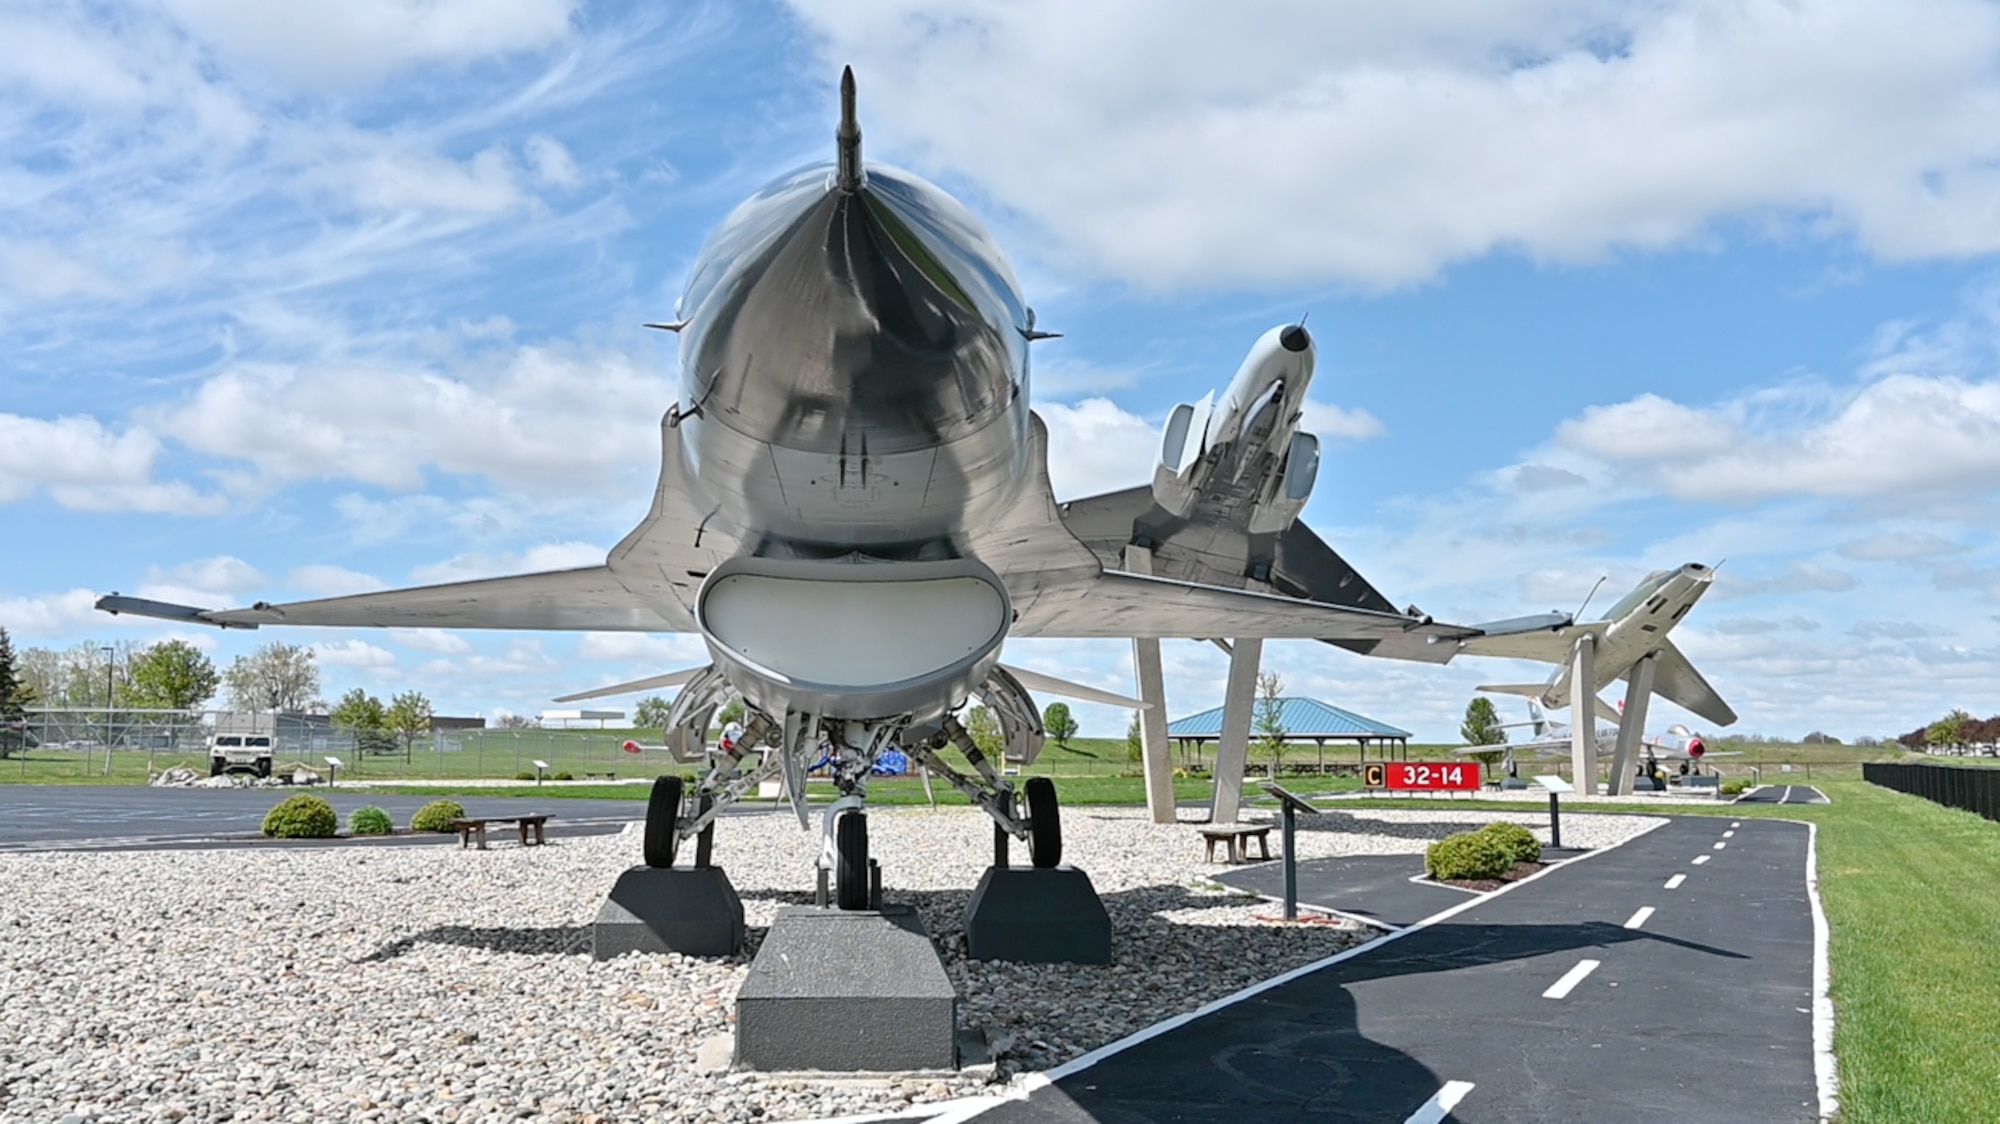 Heritage Park, adjacent to the Fort Wayne International Airport, is a private park open to the public to showcase all of the aircraft flown by the 122nd Fighter Wing, Indiana Air National Guard since 1947.